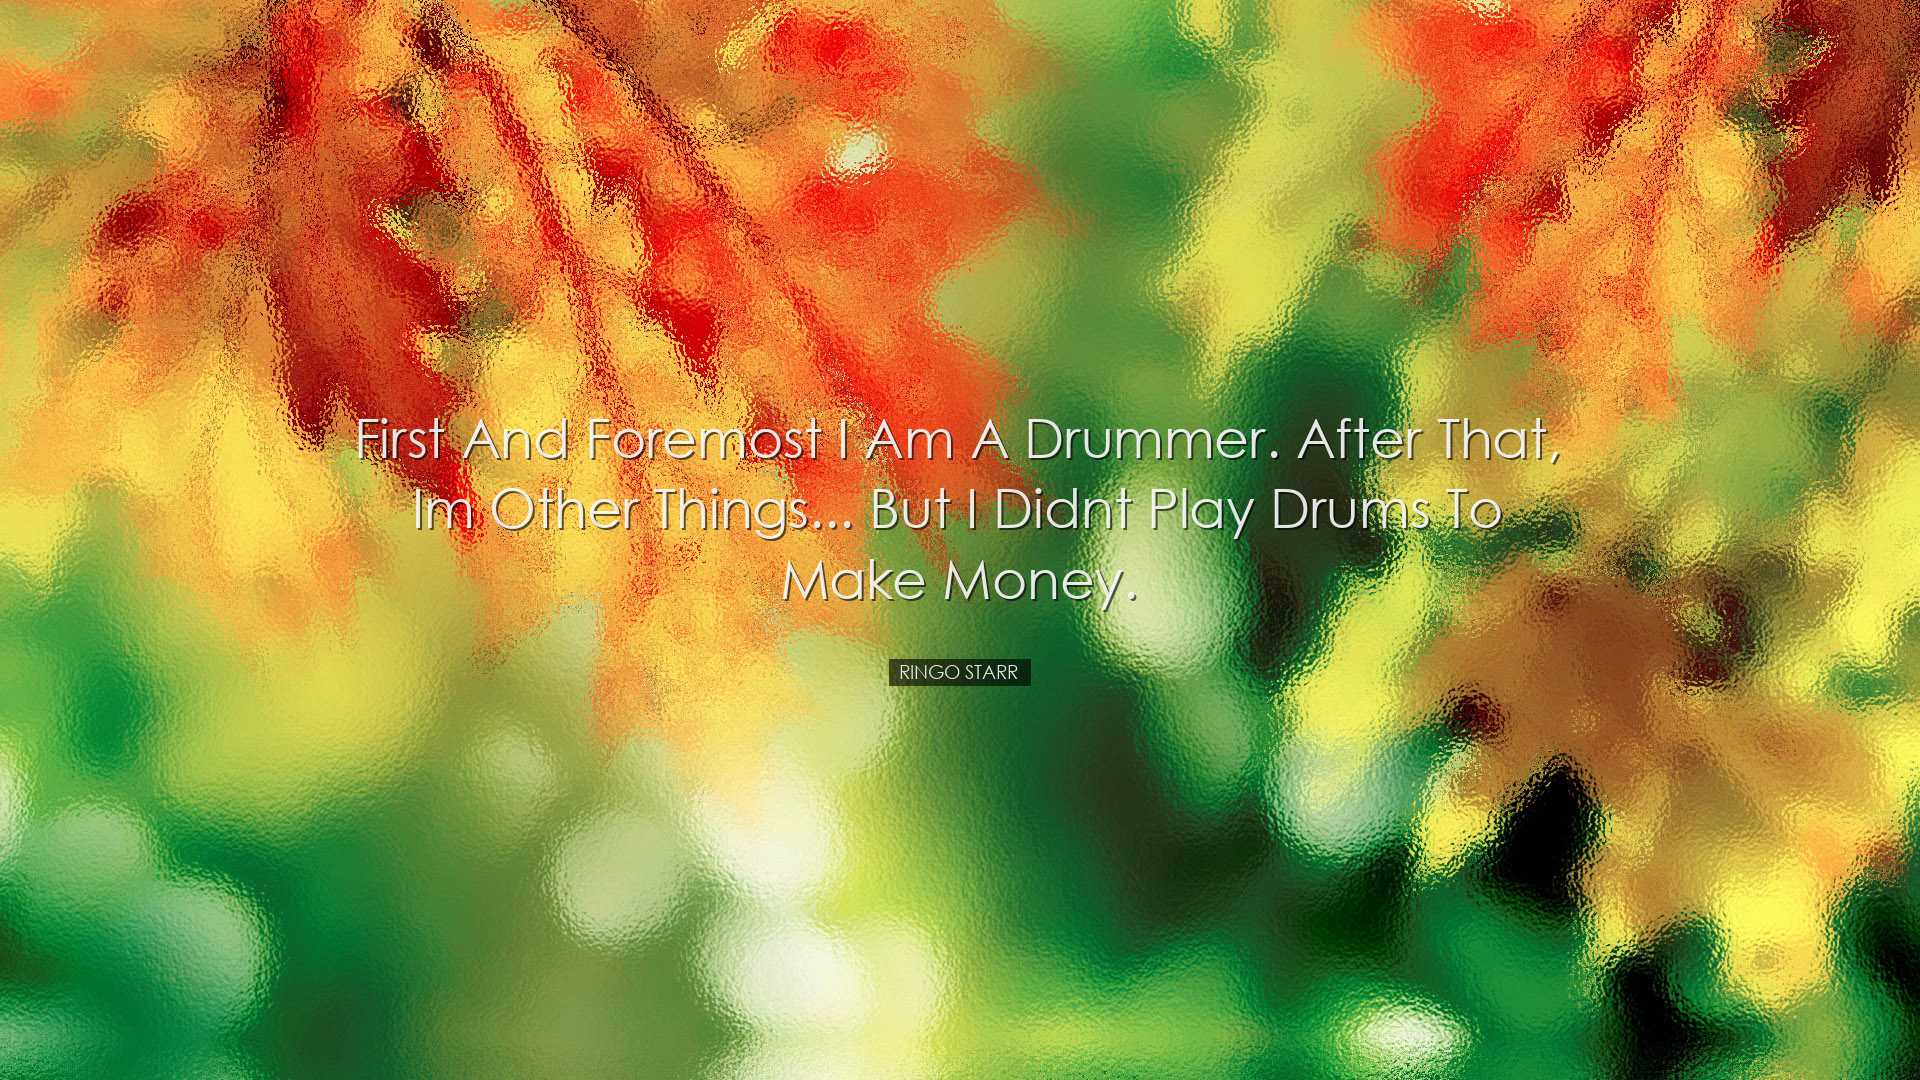 First and foremost I am a drummer. After that, Im other things...